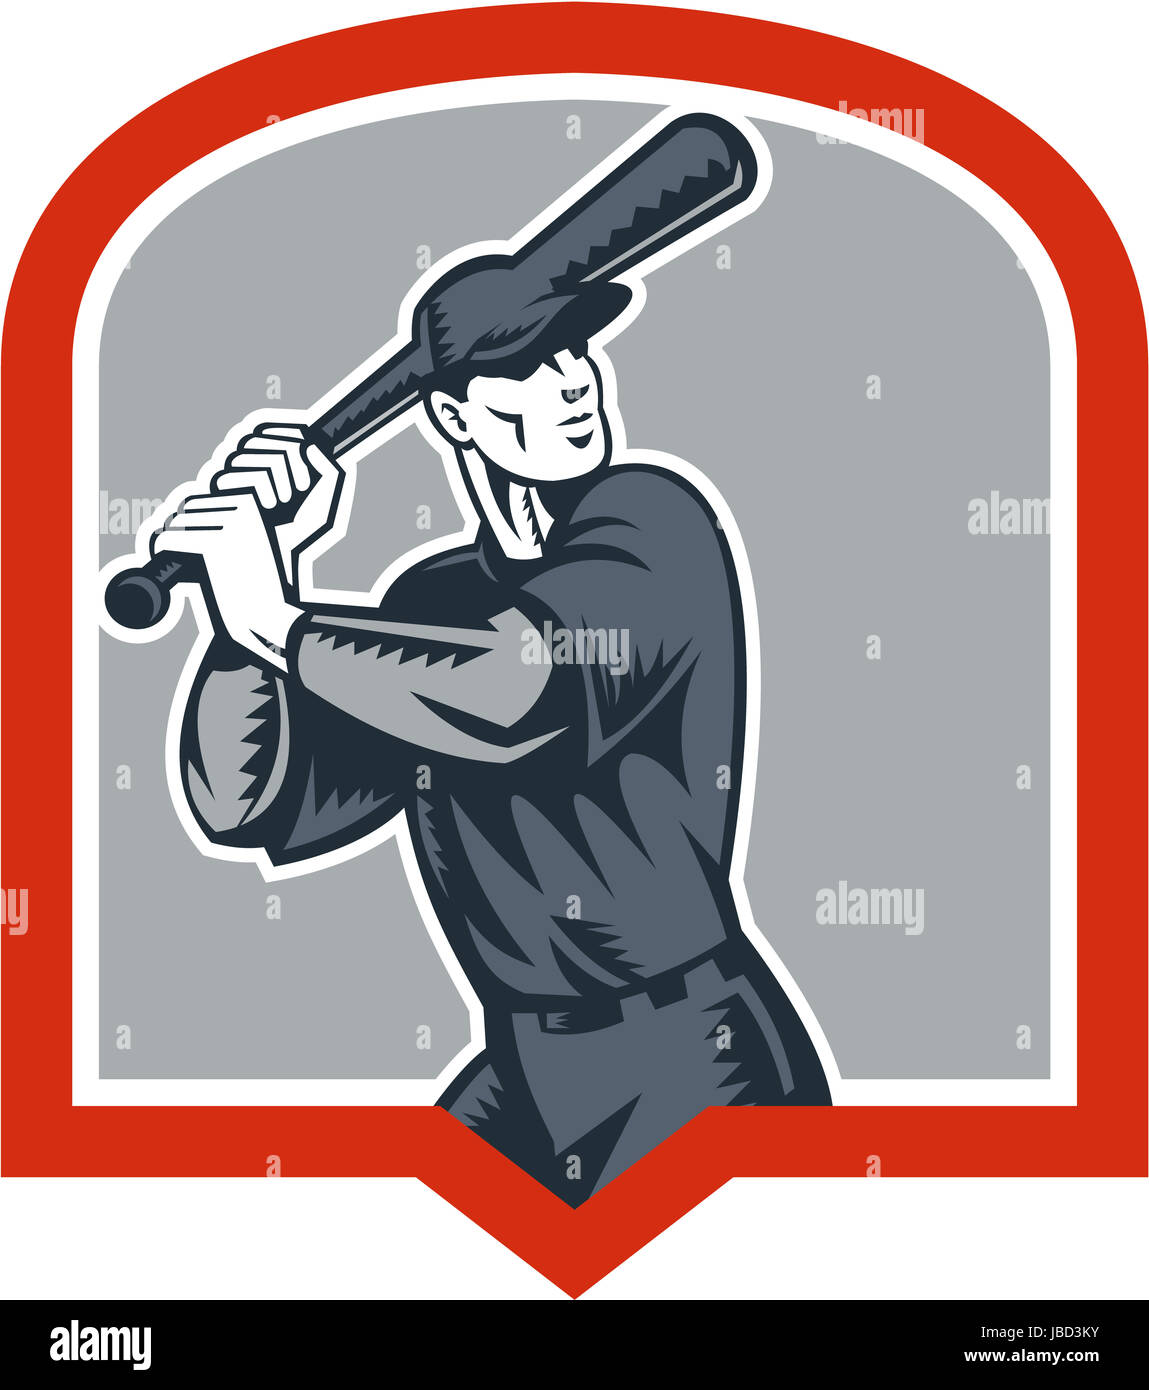 Illustration of a american baseball player batter batting set inside shield crest shape done in retro woodcut style isolated on white background. Stock Photo